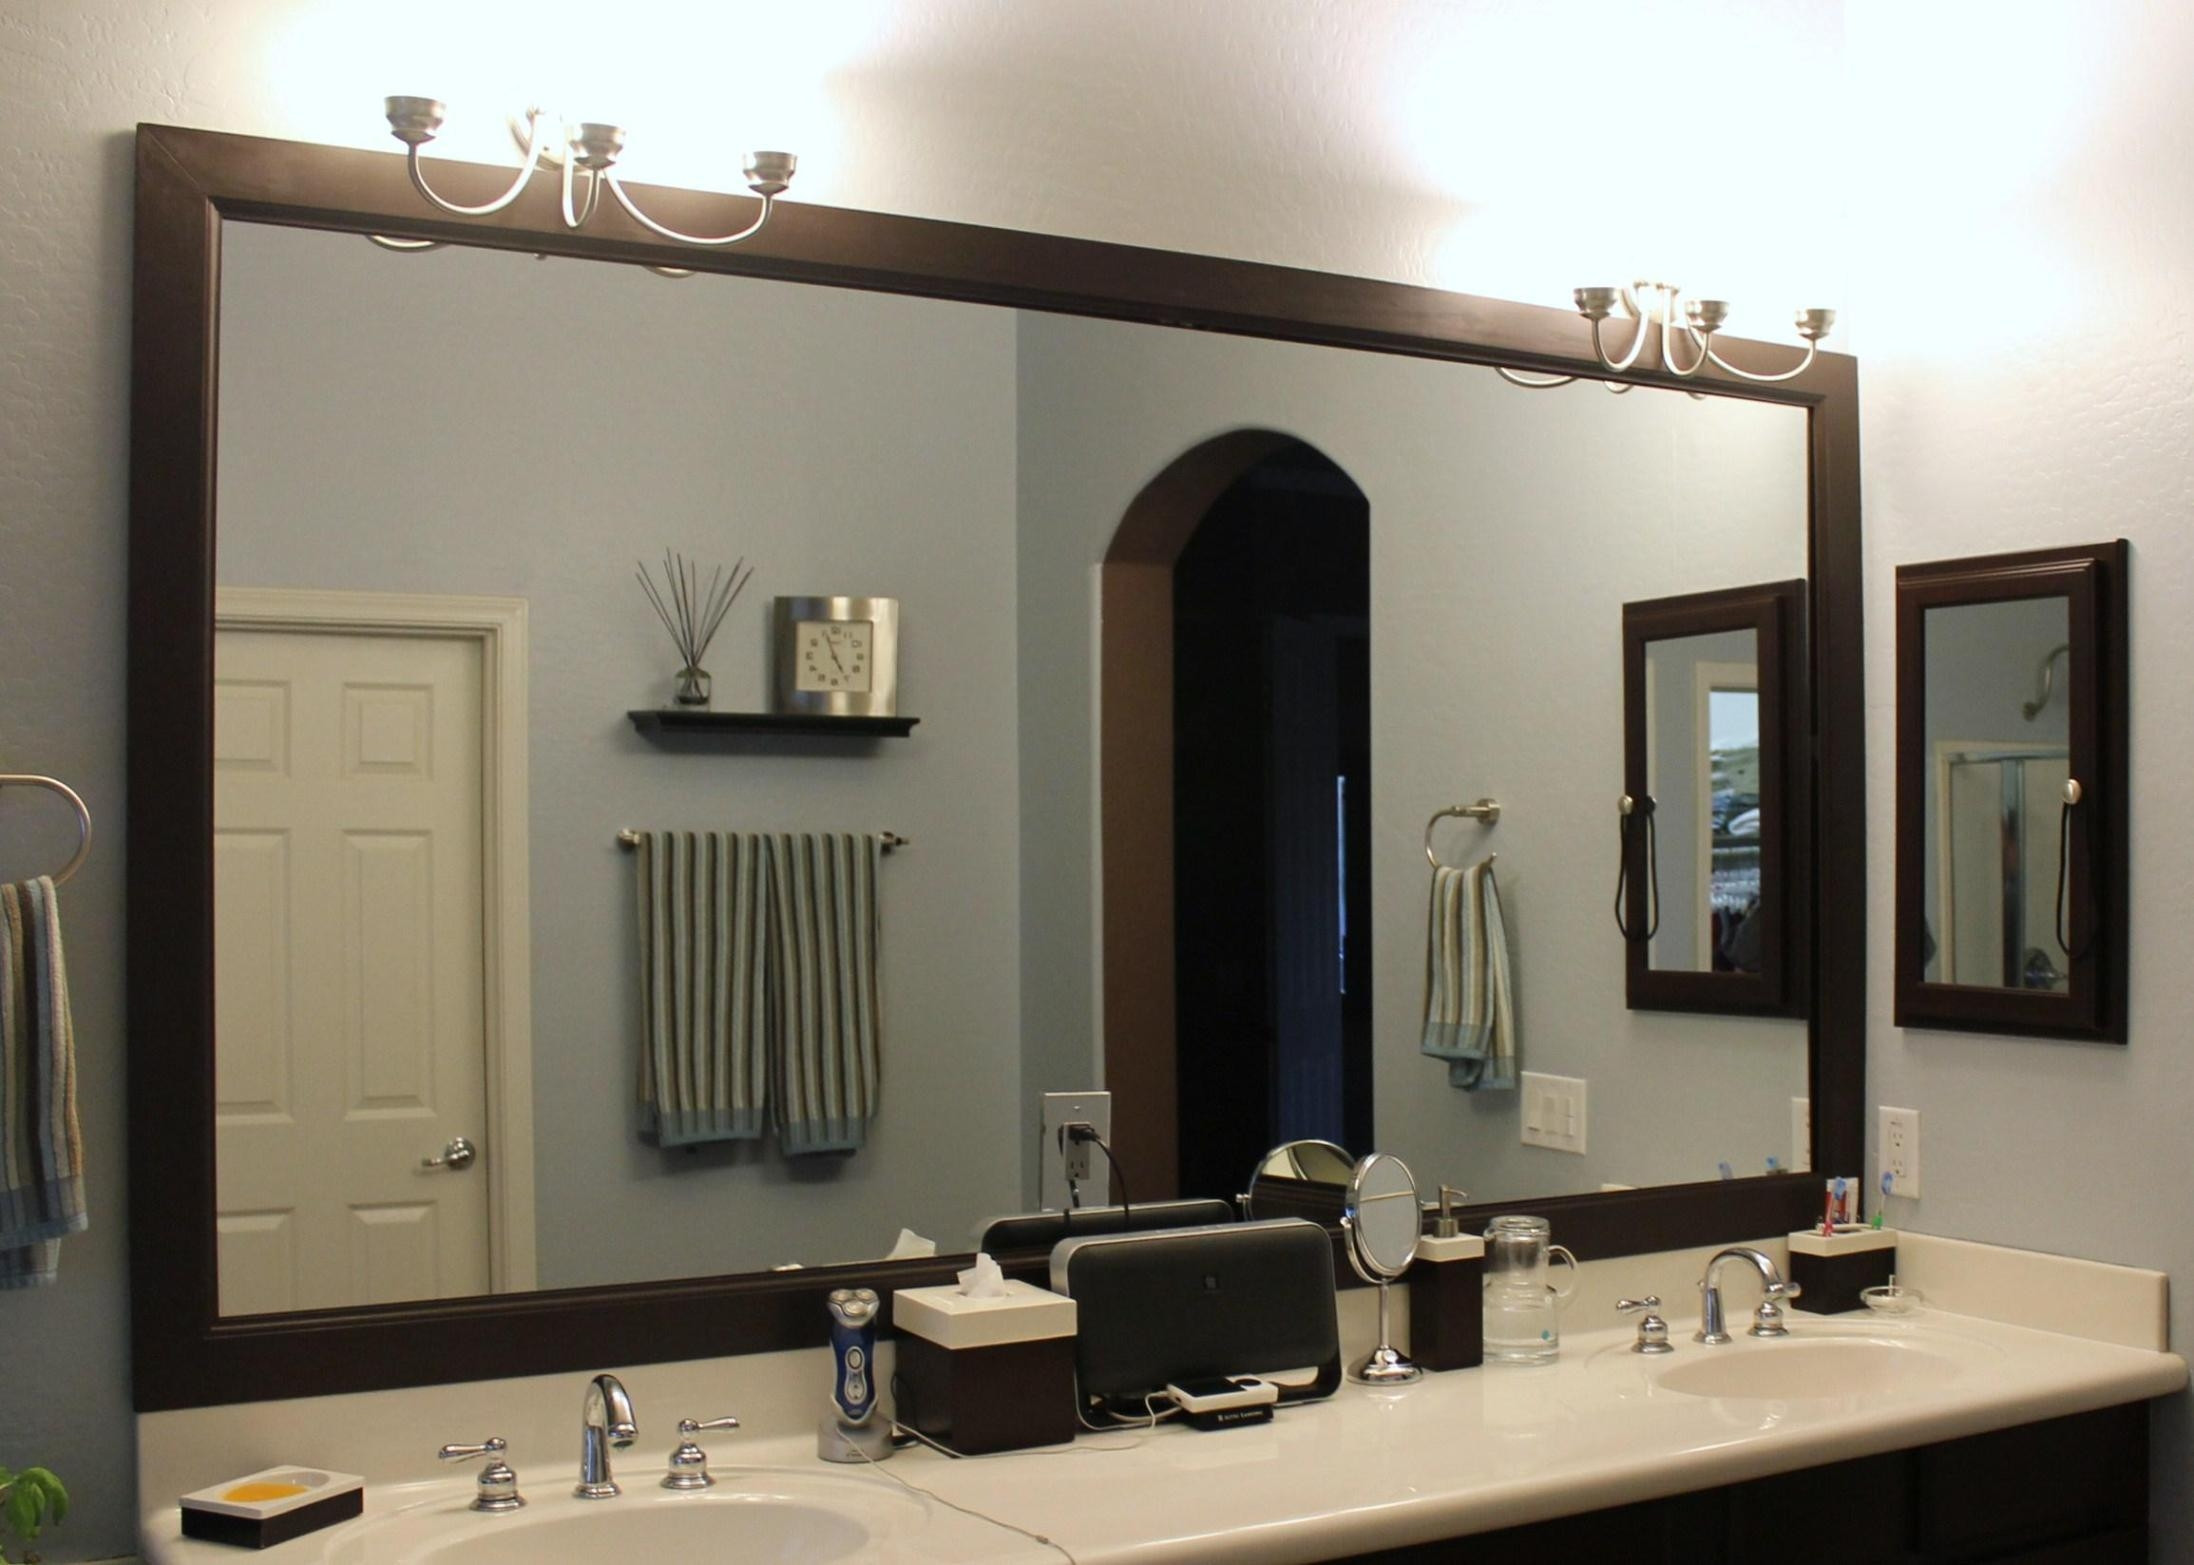 Vanity Wall Mirrors For Bathroom
 20 Collection of Decorative Mirrors for Bathroom Vanity